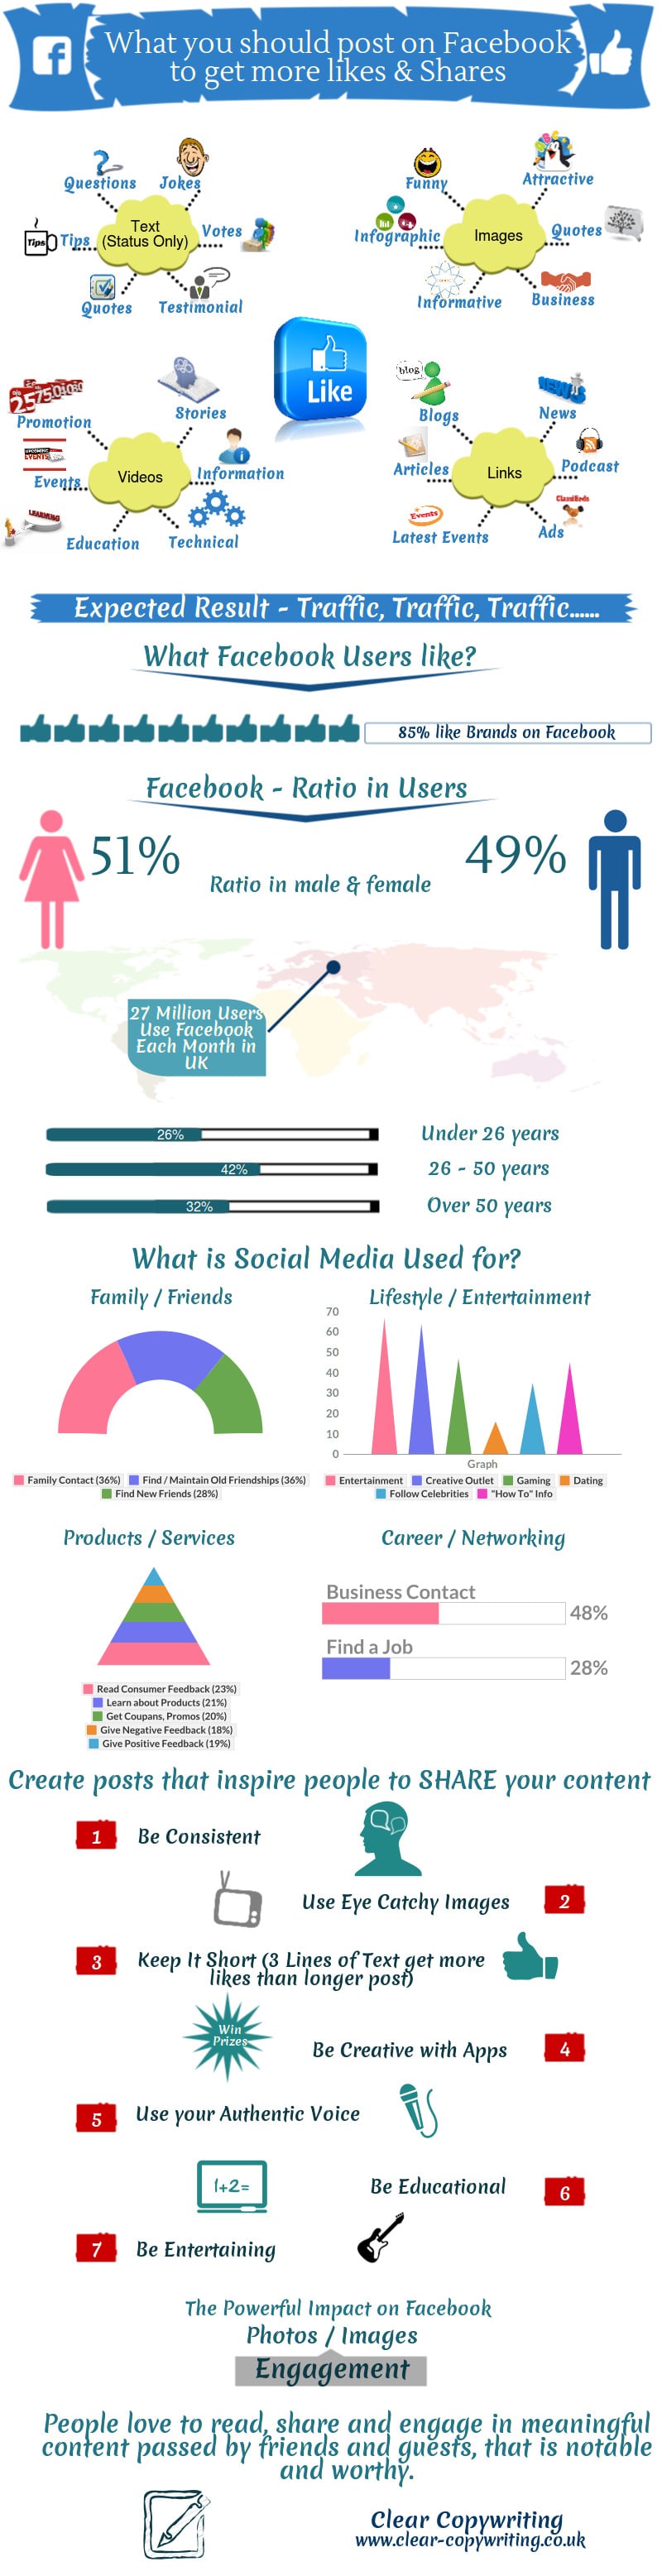 What To Post To Get More Likes On Facebook [Infographic]